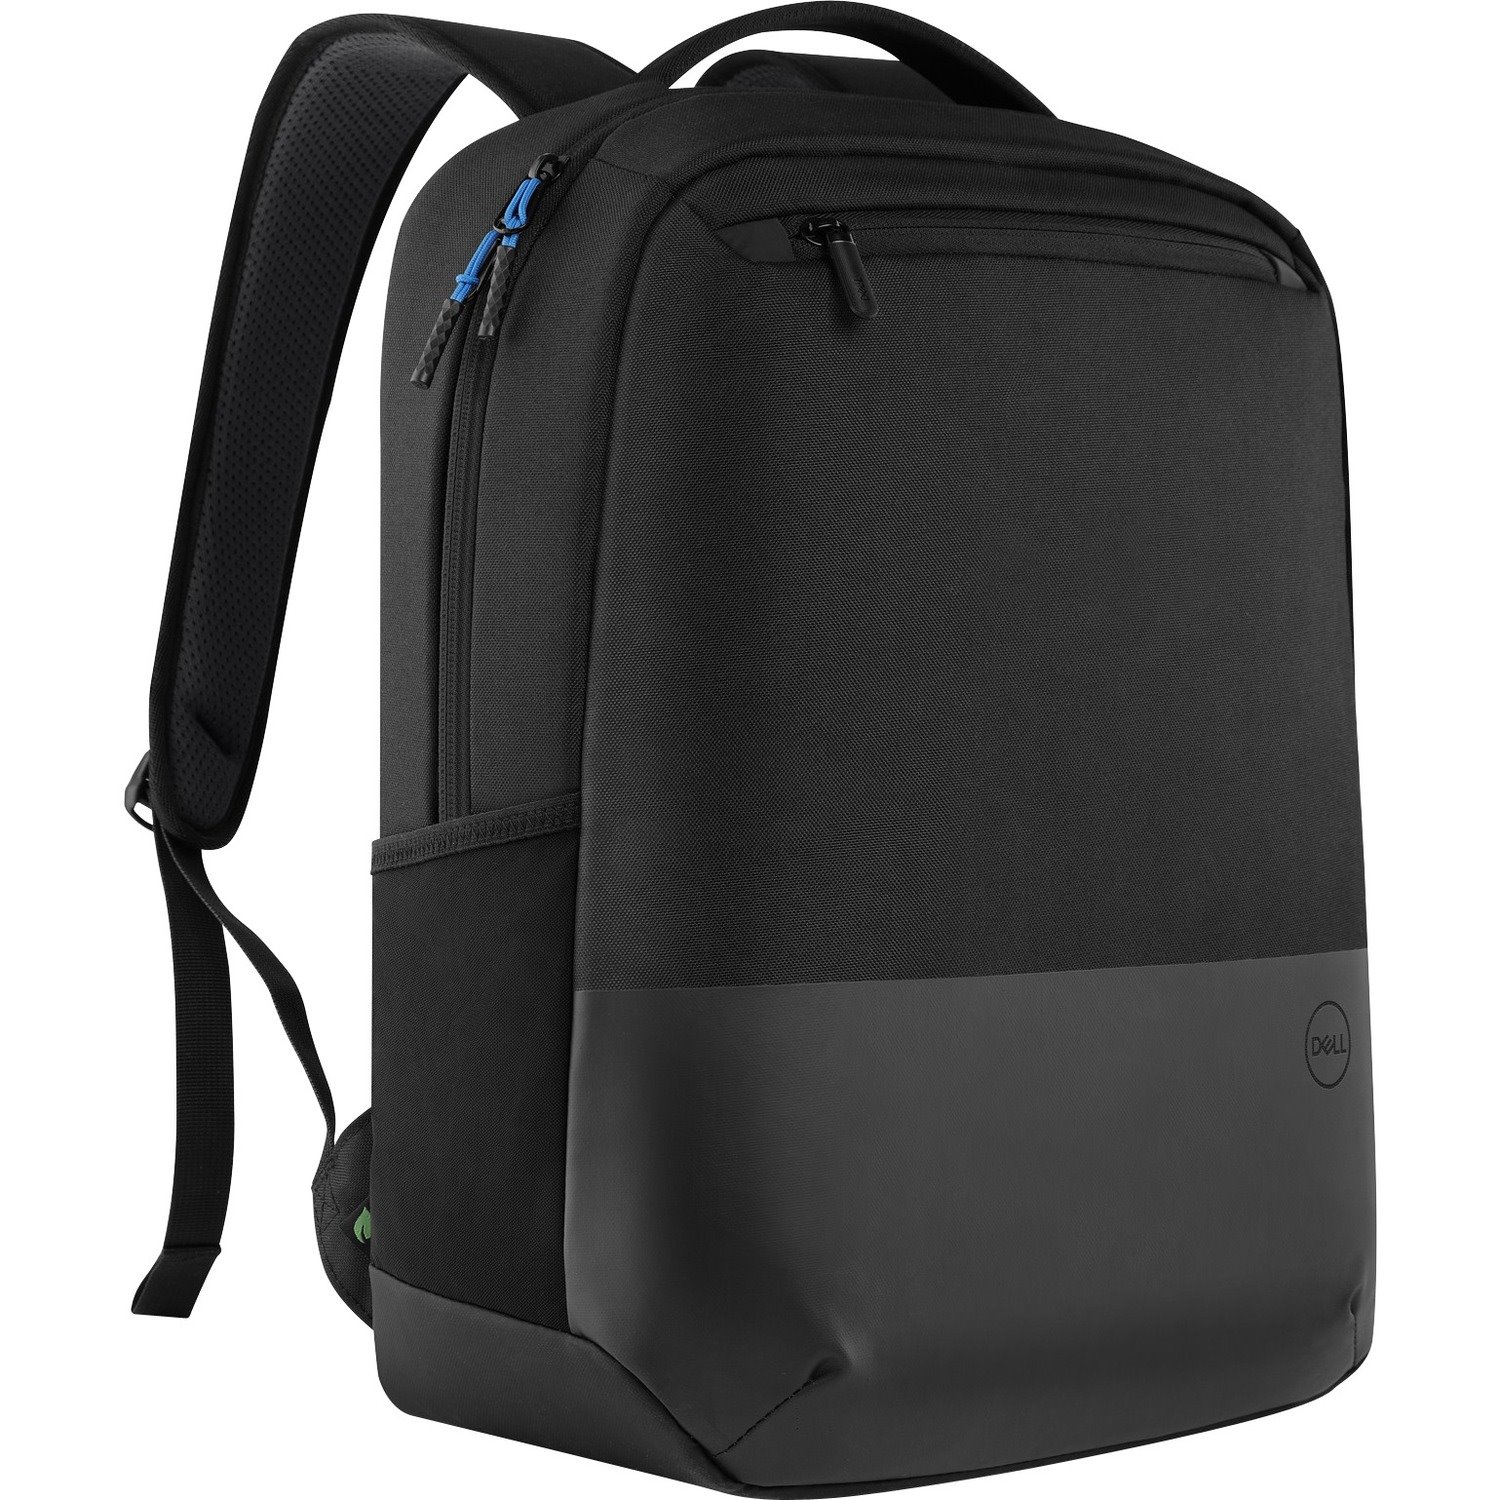 Dell Pro Slim PO1520PS Carrying Case (Backpack) for 38.1 cm (15") Dell Notebook - Black